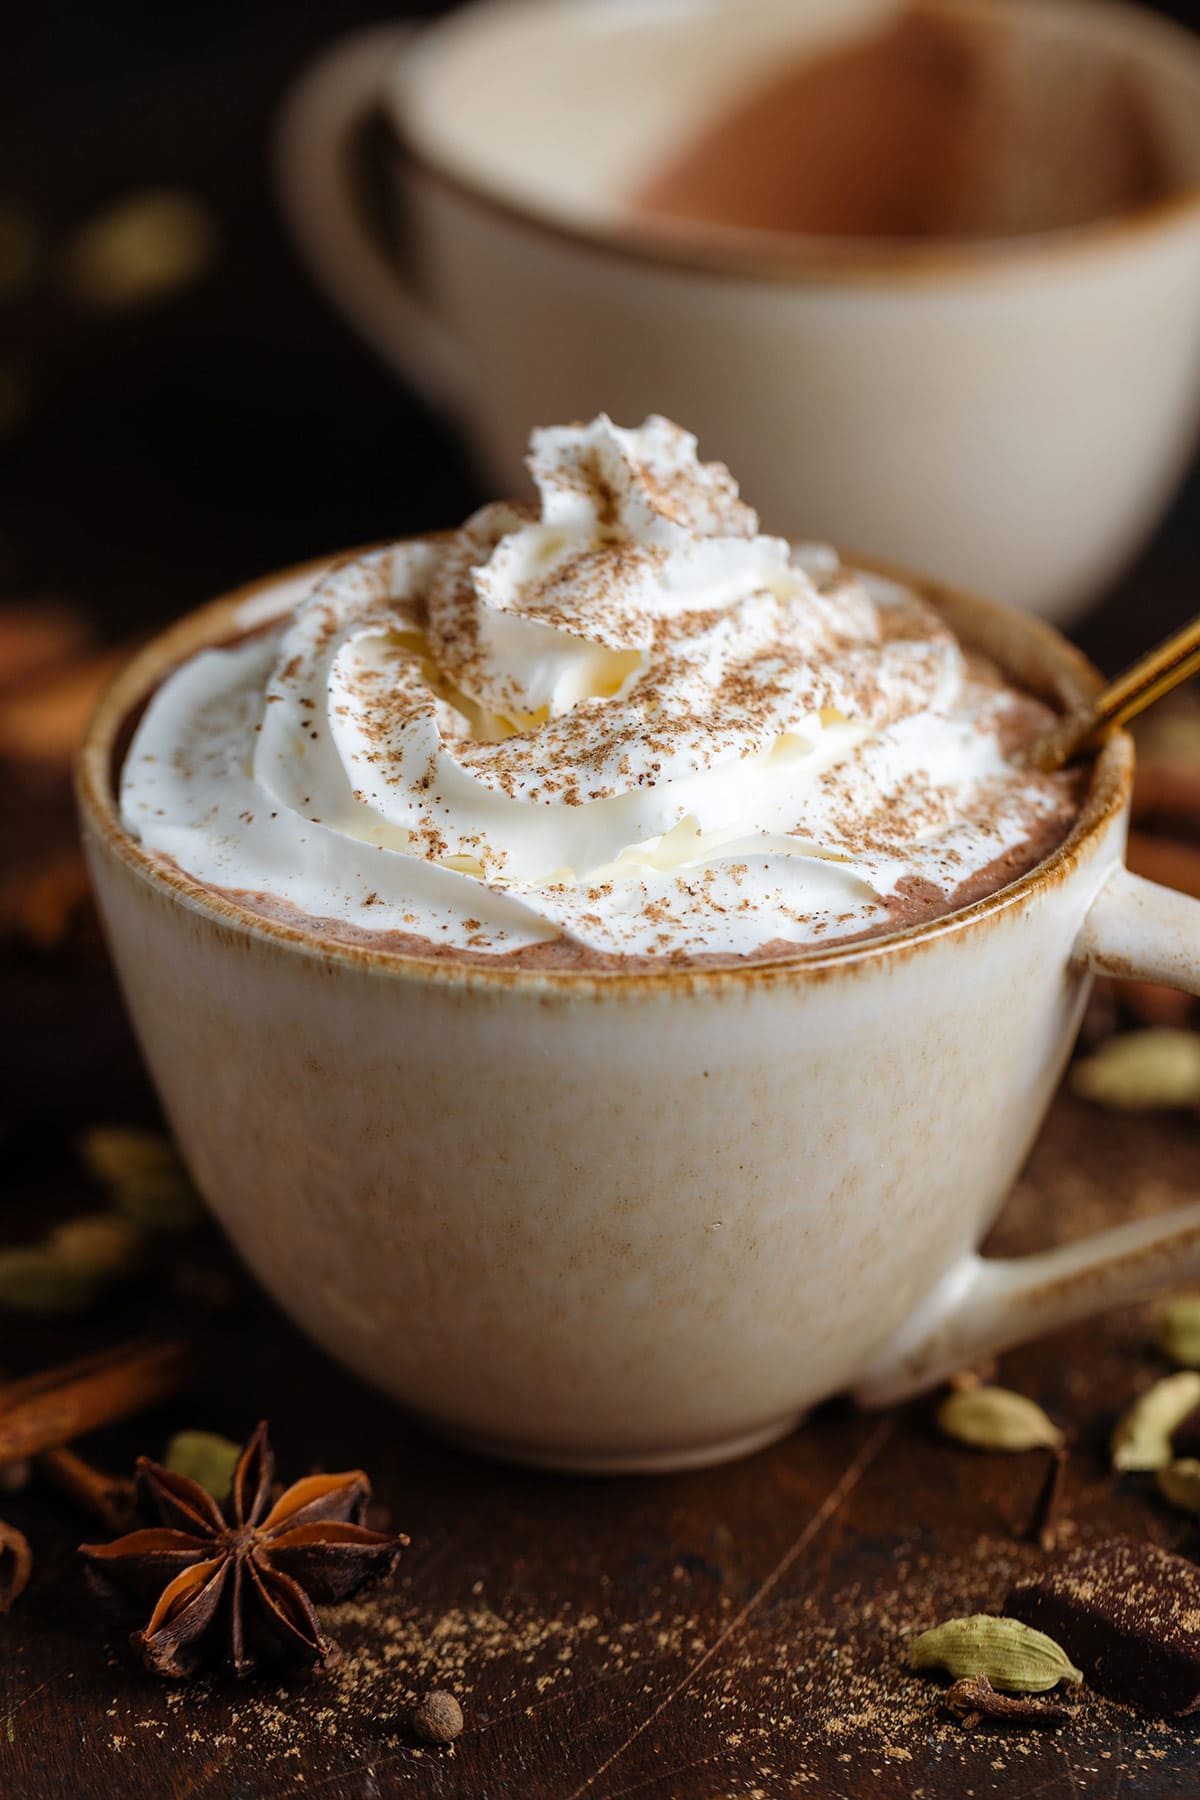 Creamy hot chocolate with whipped cream and chai spice on top in a beige mug.